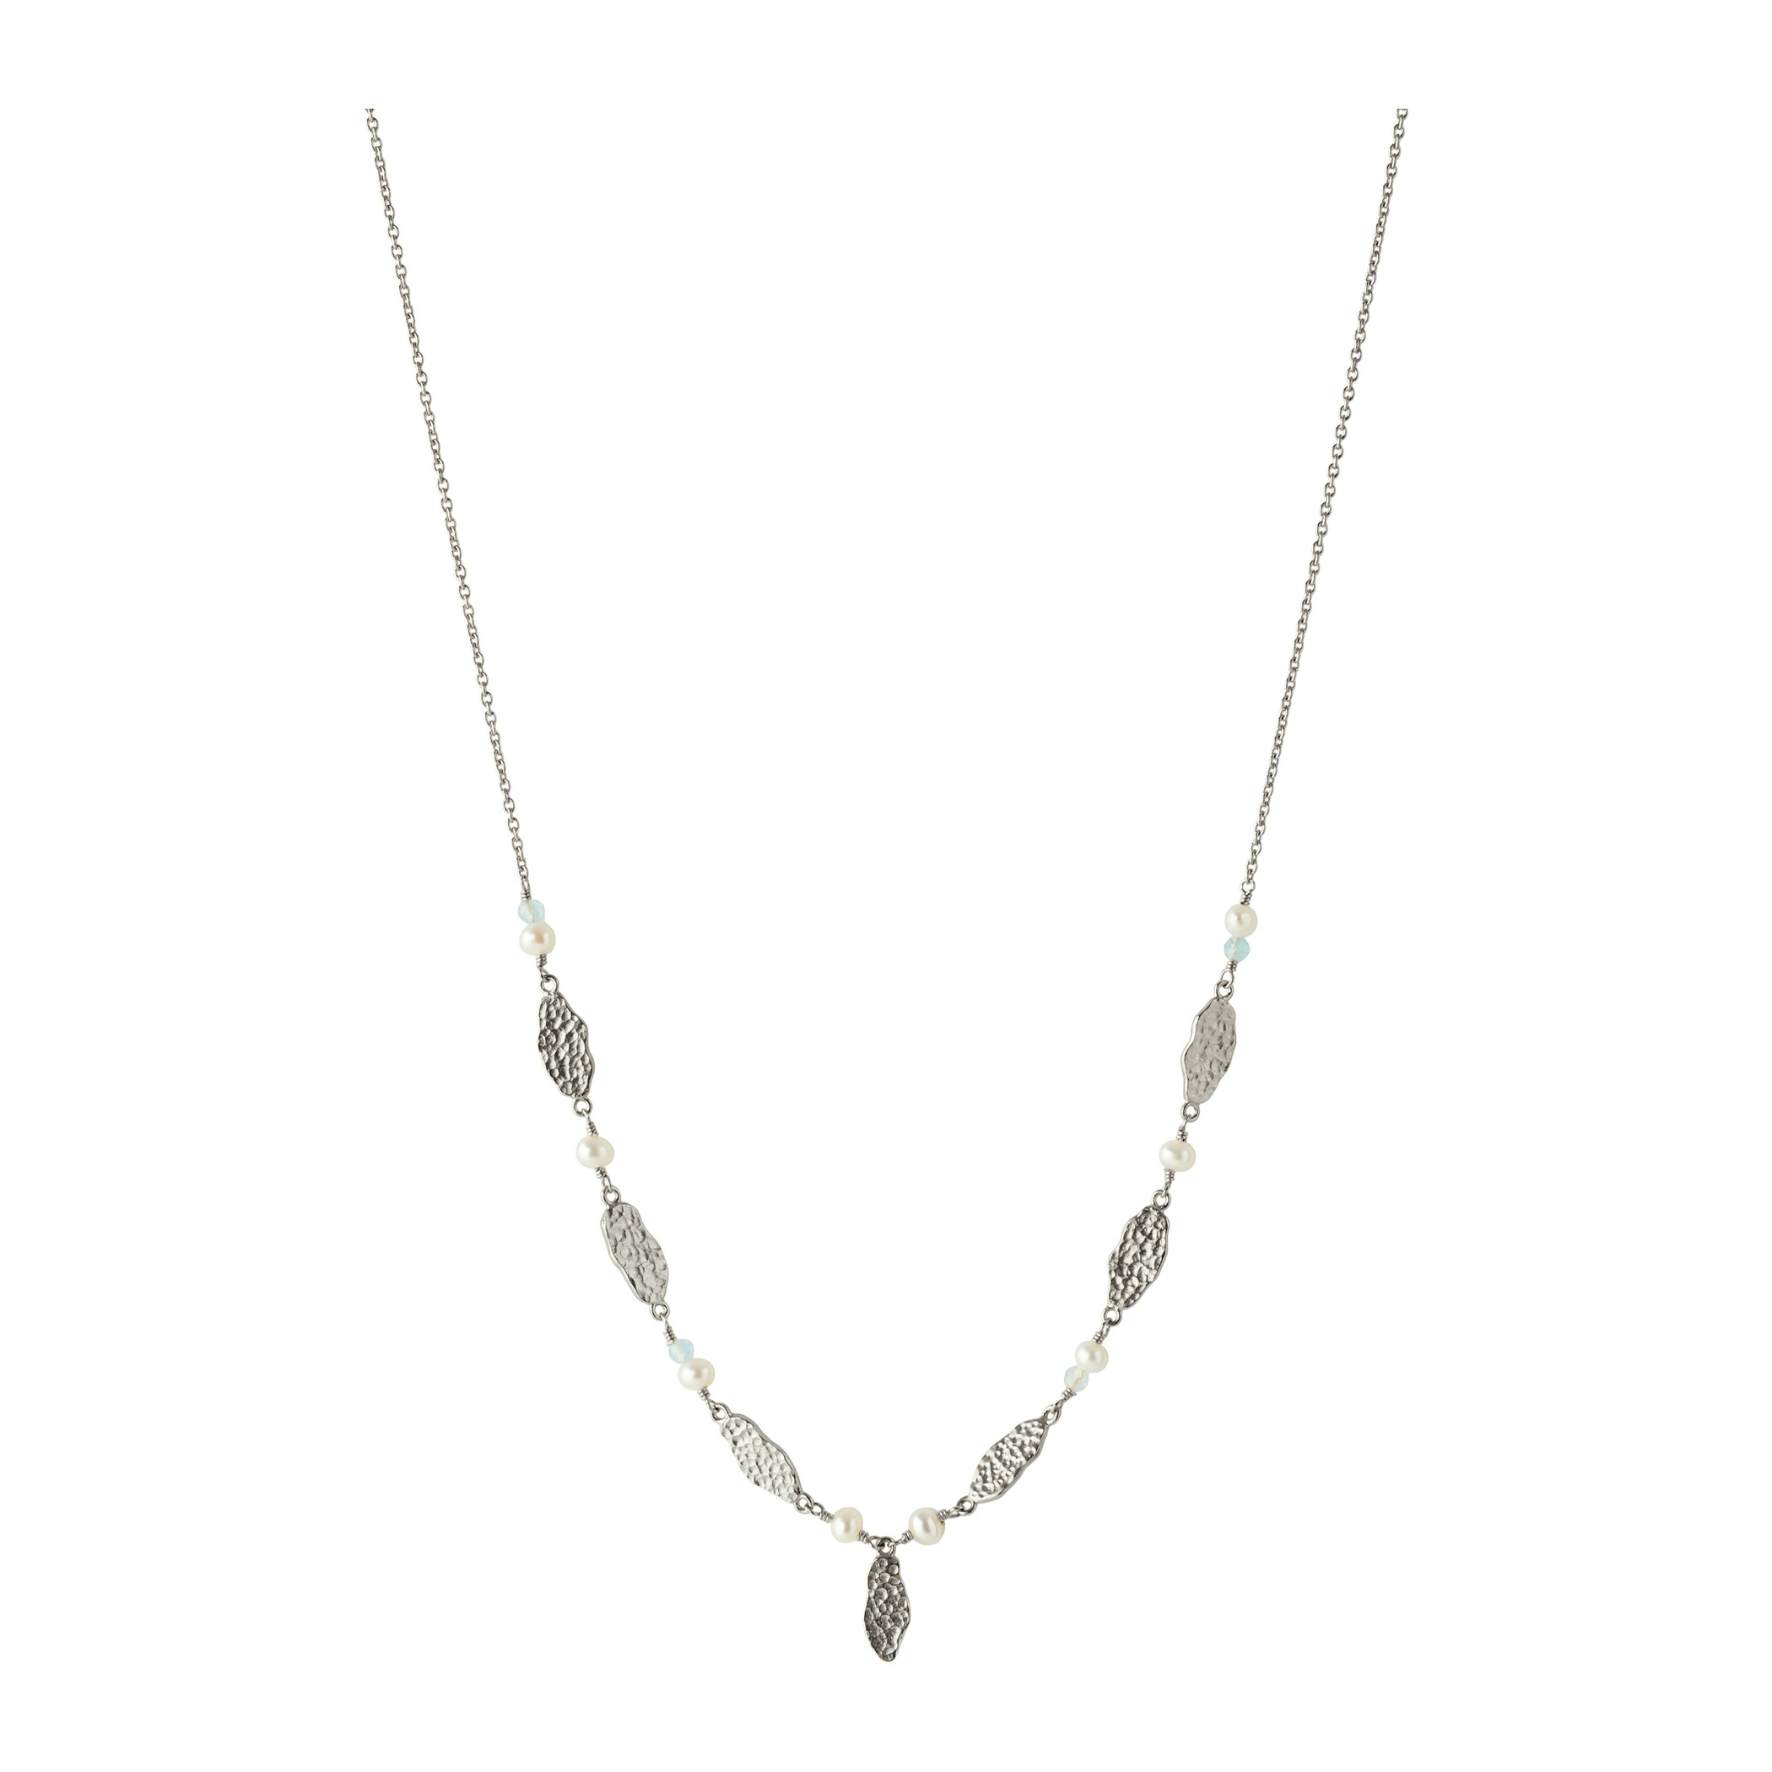 Drifting Dream Necklace from Pernille Corydon in Silver Sterling 925